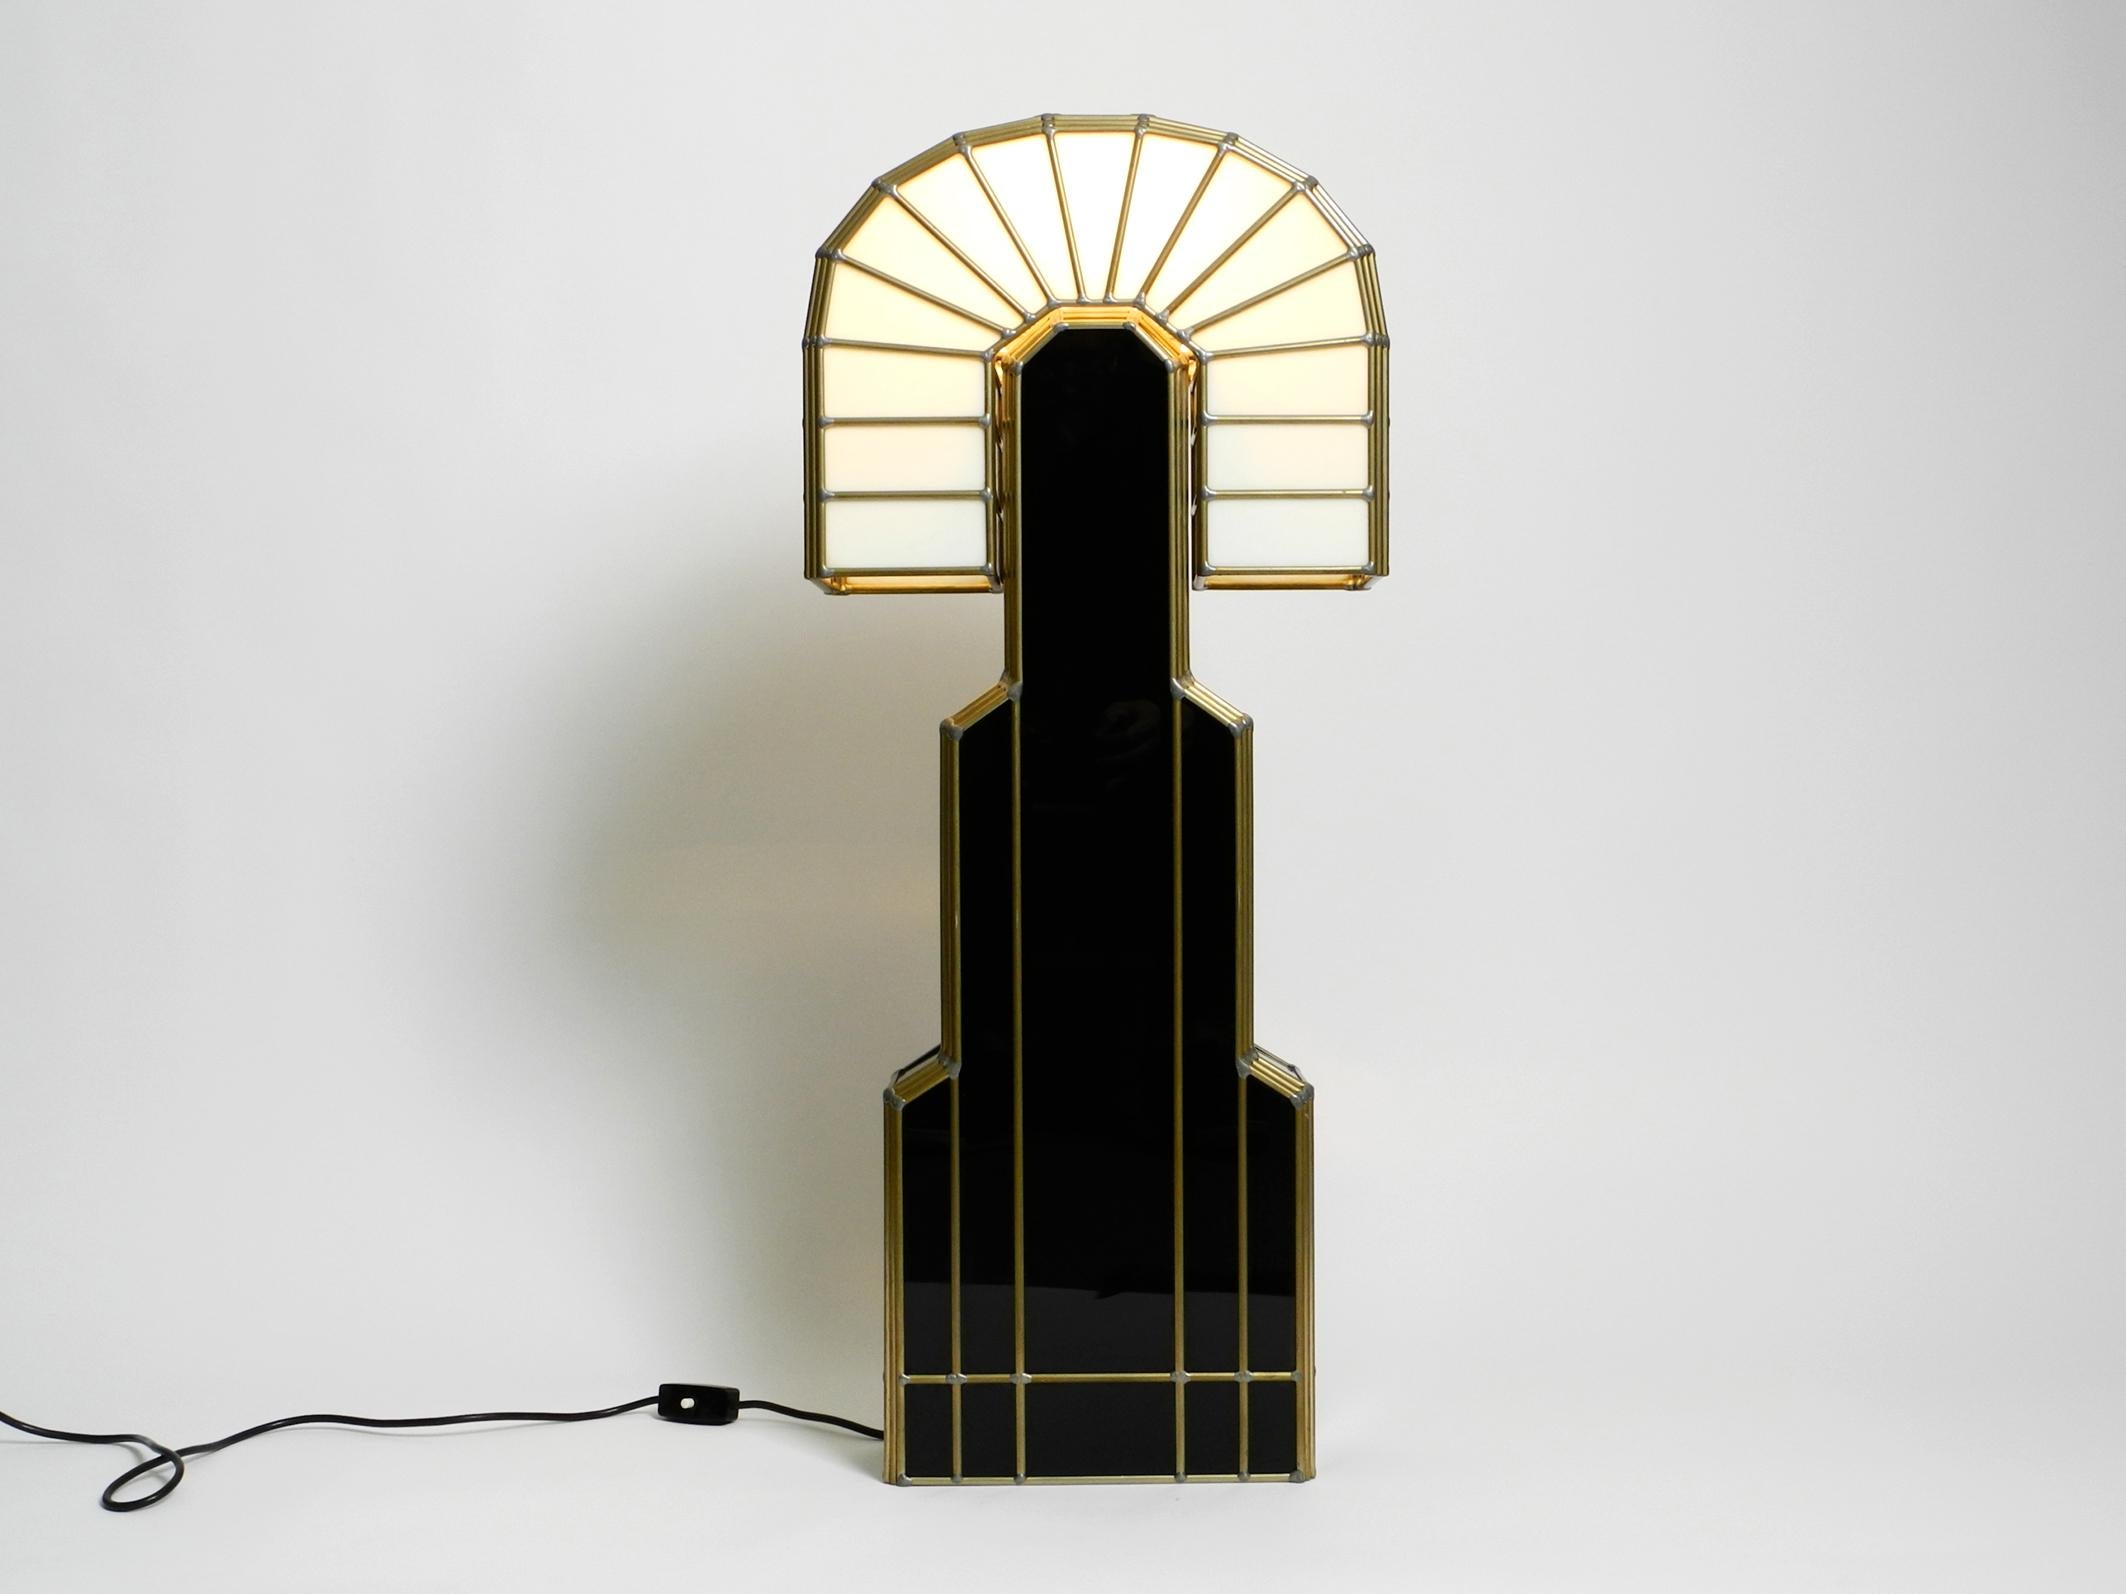 Very extraordinary, huge, beautiful Postmodern Art Deco Tiffany Design table or floor lamp from 1980.
Design by Schulz, with original label at the bottom edge.
Limited to 100 pieces. This is number 15.
Frame consists of black glass and